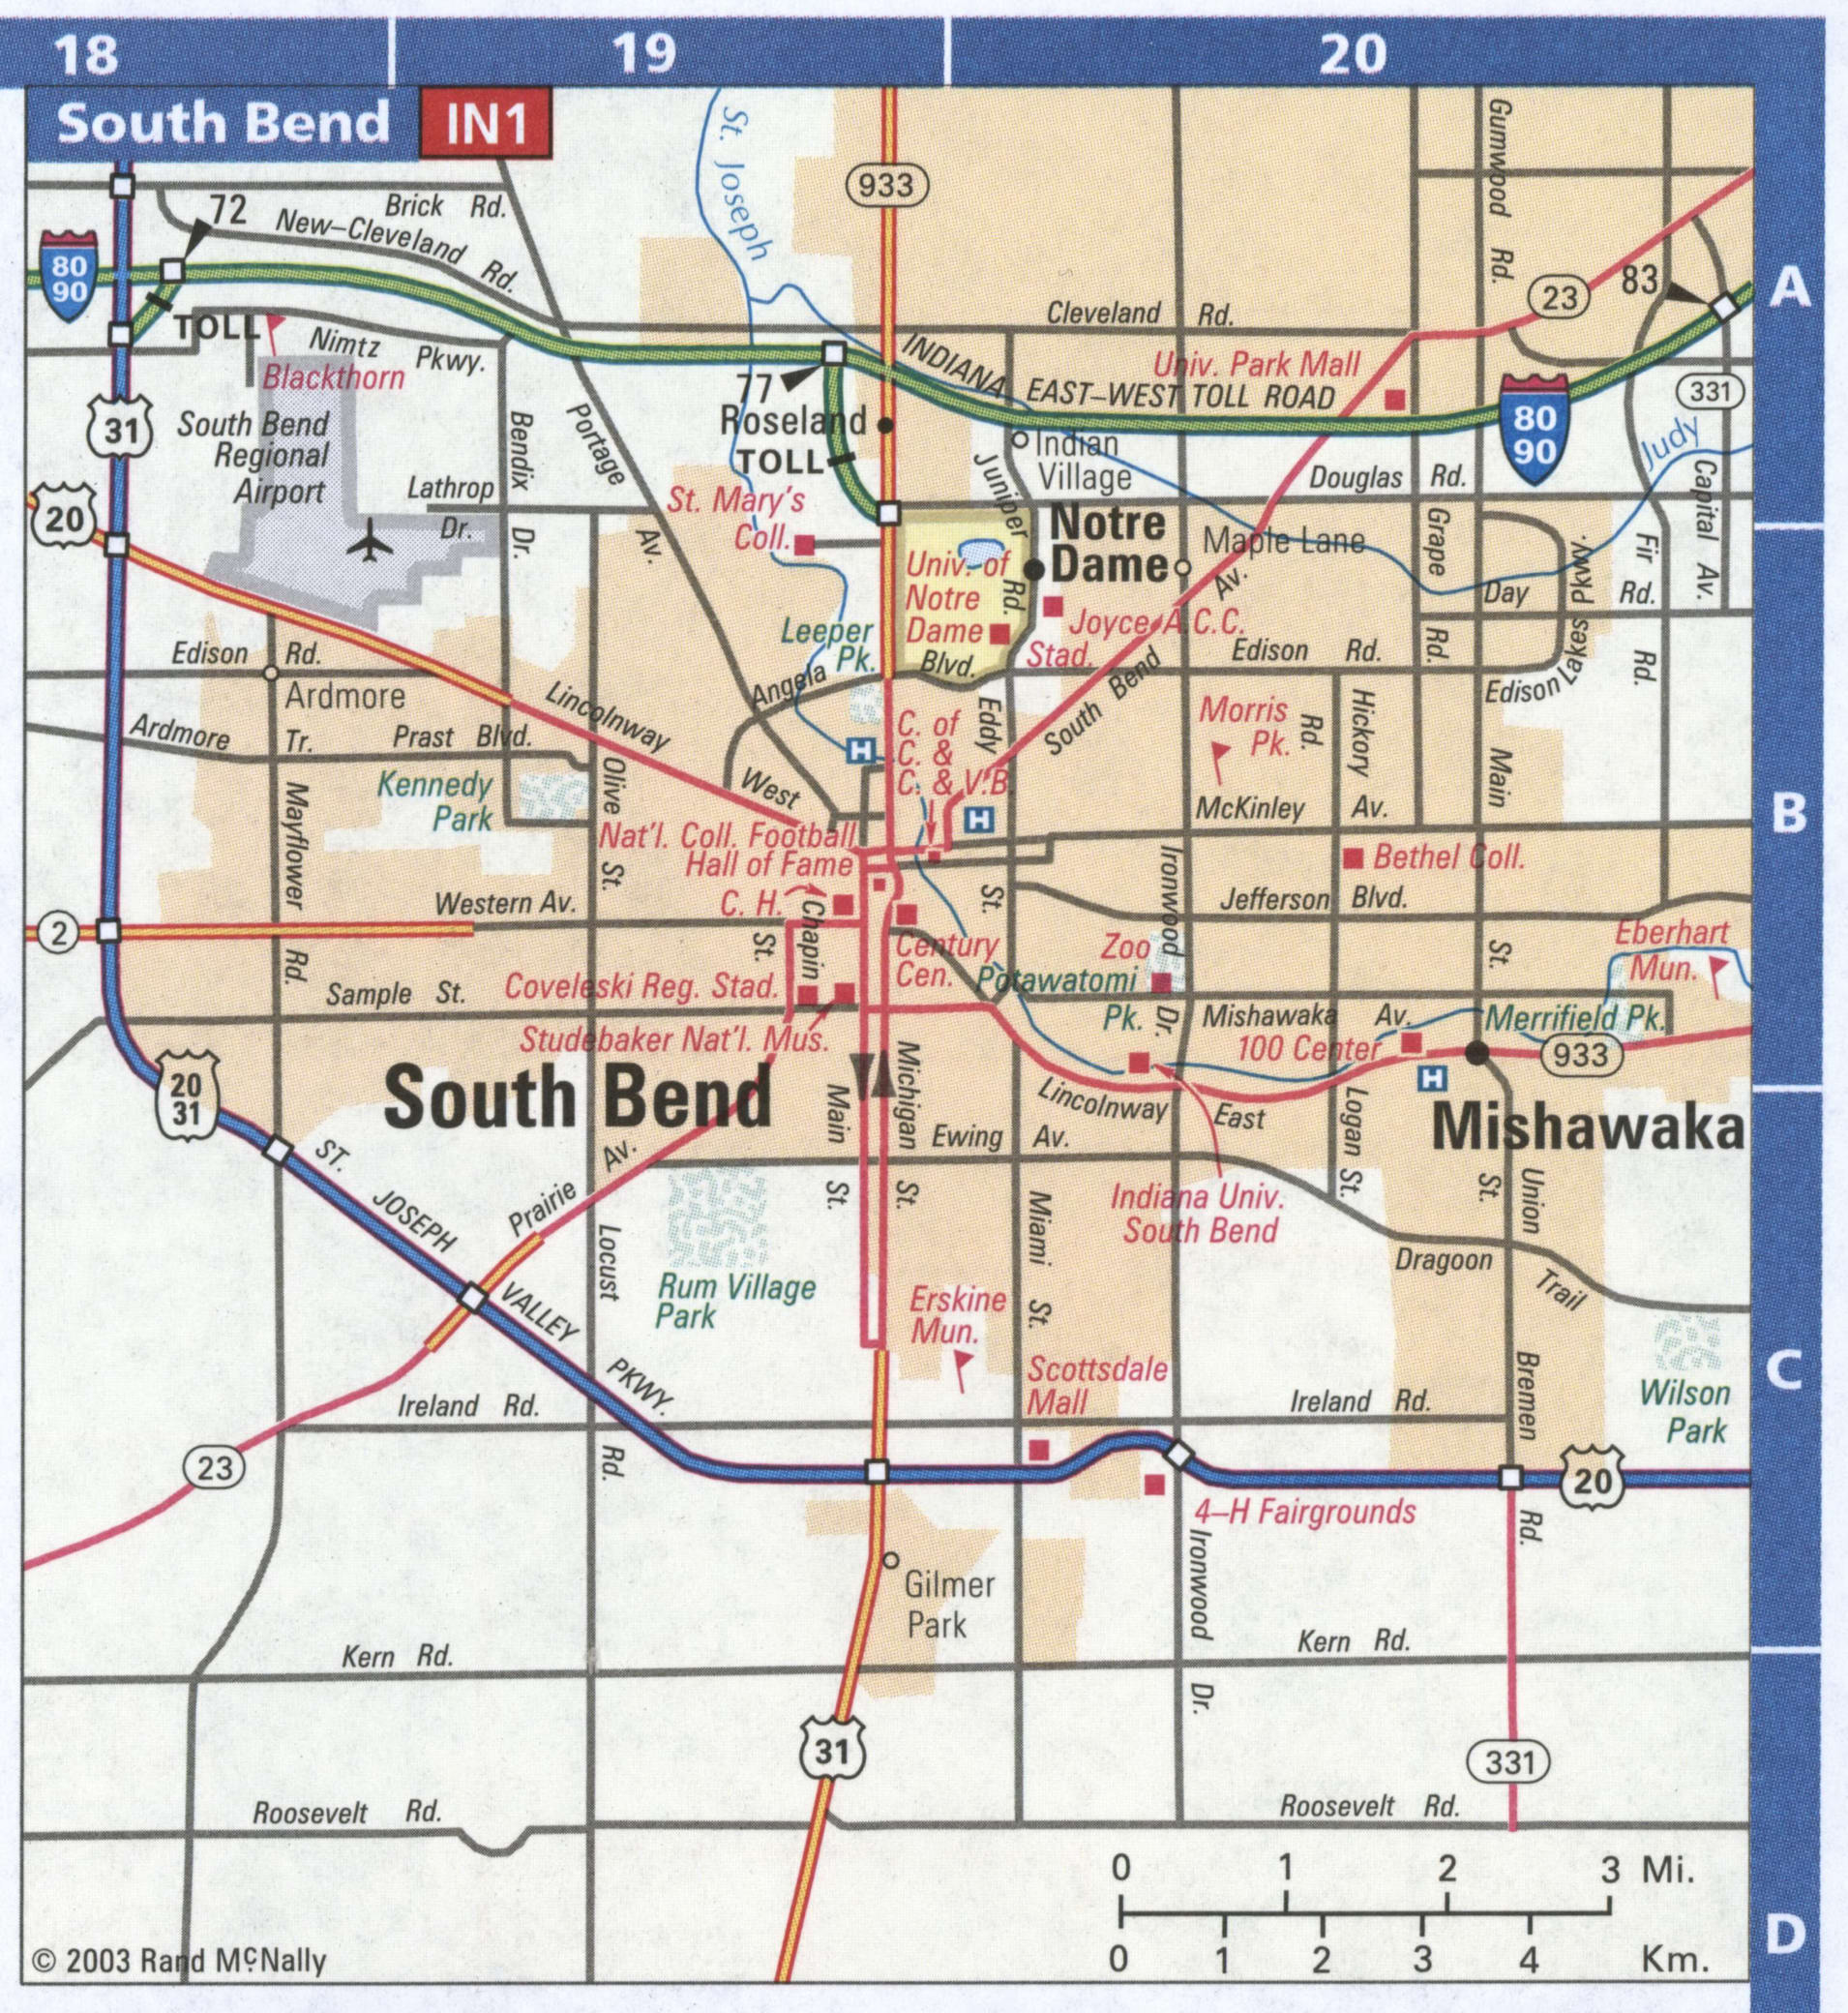 South Bend road map